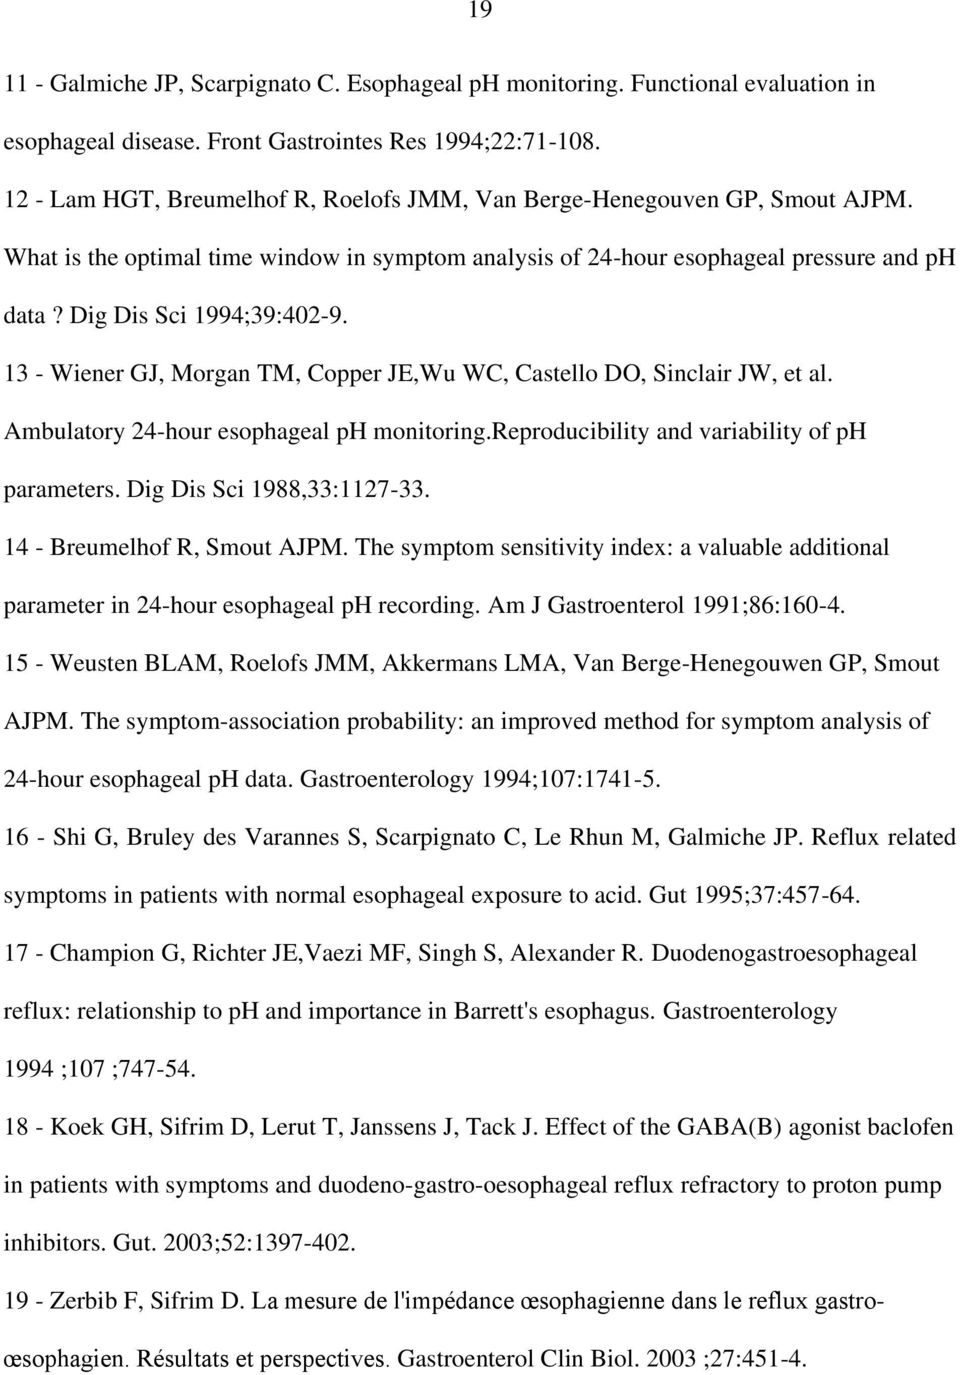 13 - Wiener GJ, Morgan TM, Copper JE,Wu WC, Castello DO, Sinclair JW, et al. Ambulatory 24-hour esophageal ph monitoring.reproducibility and variability of ph parameters. Dig Dis Sci 1988,33:1127-33.